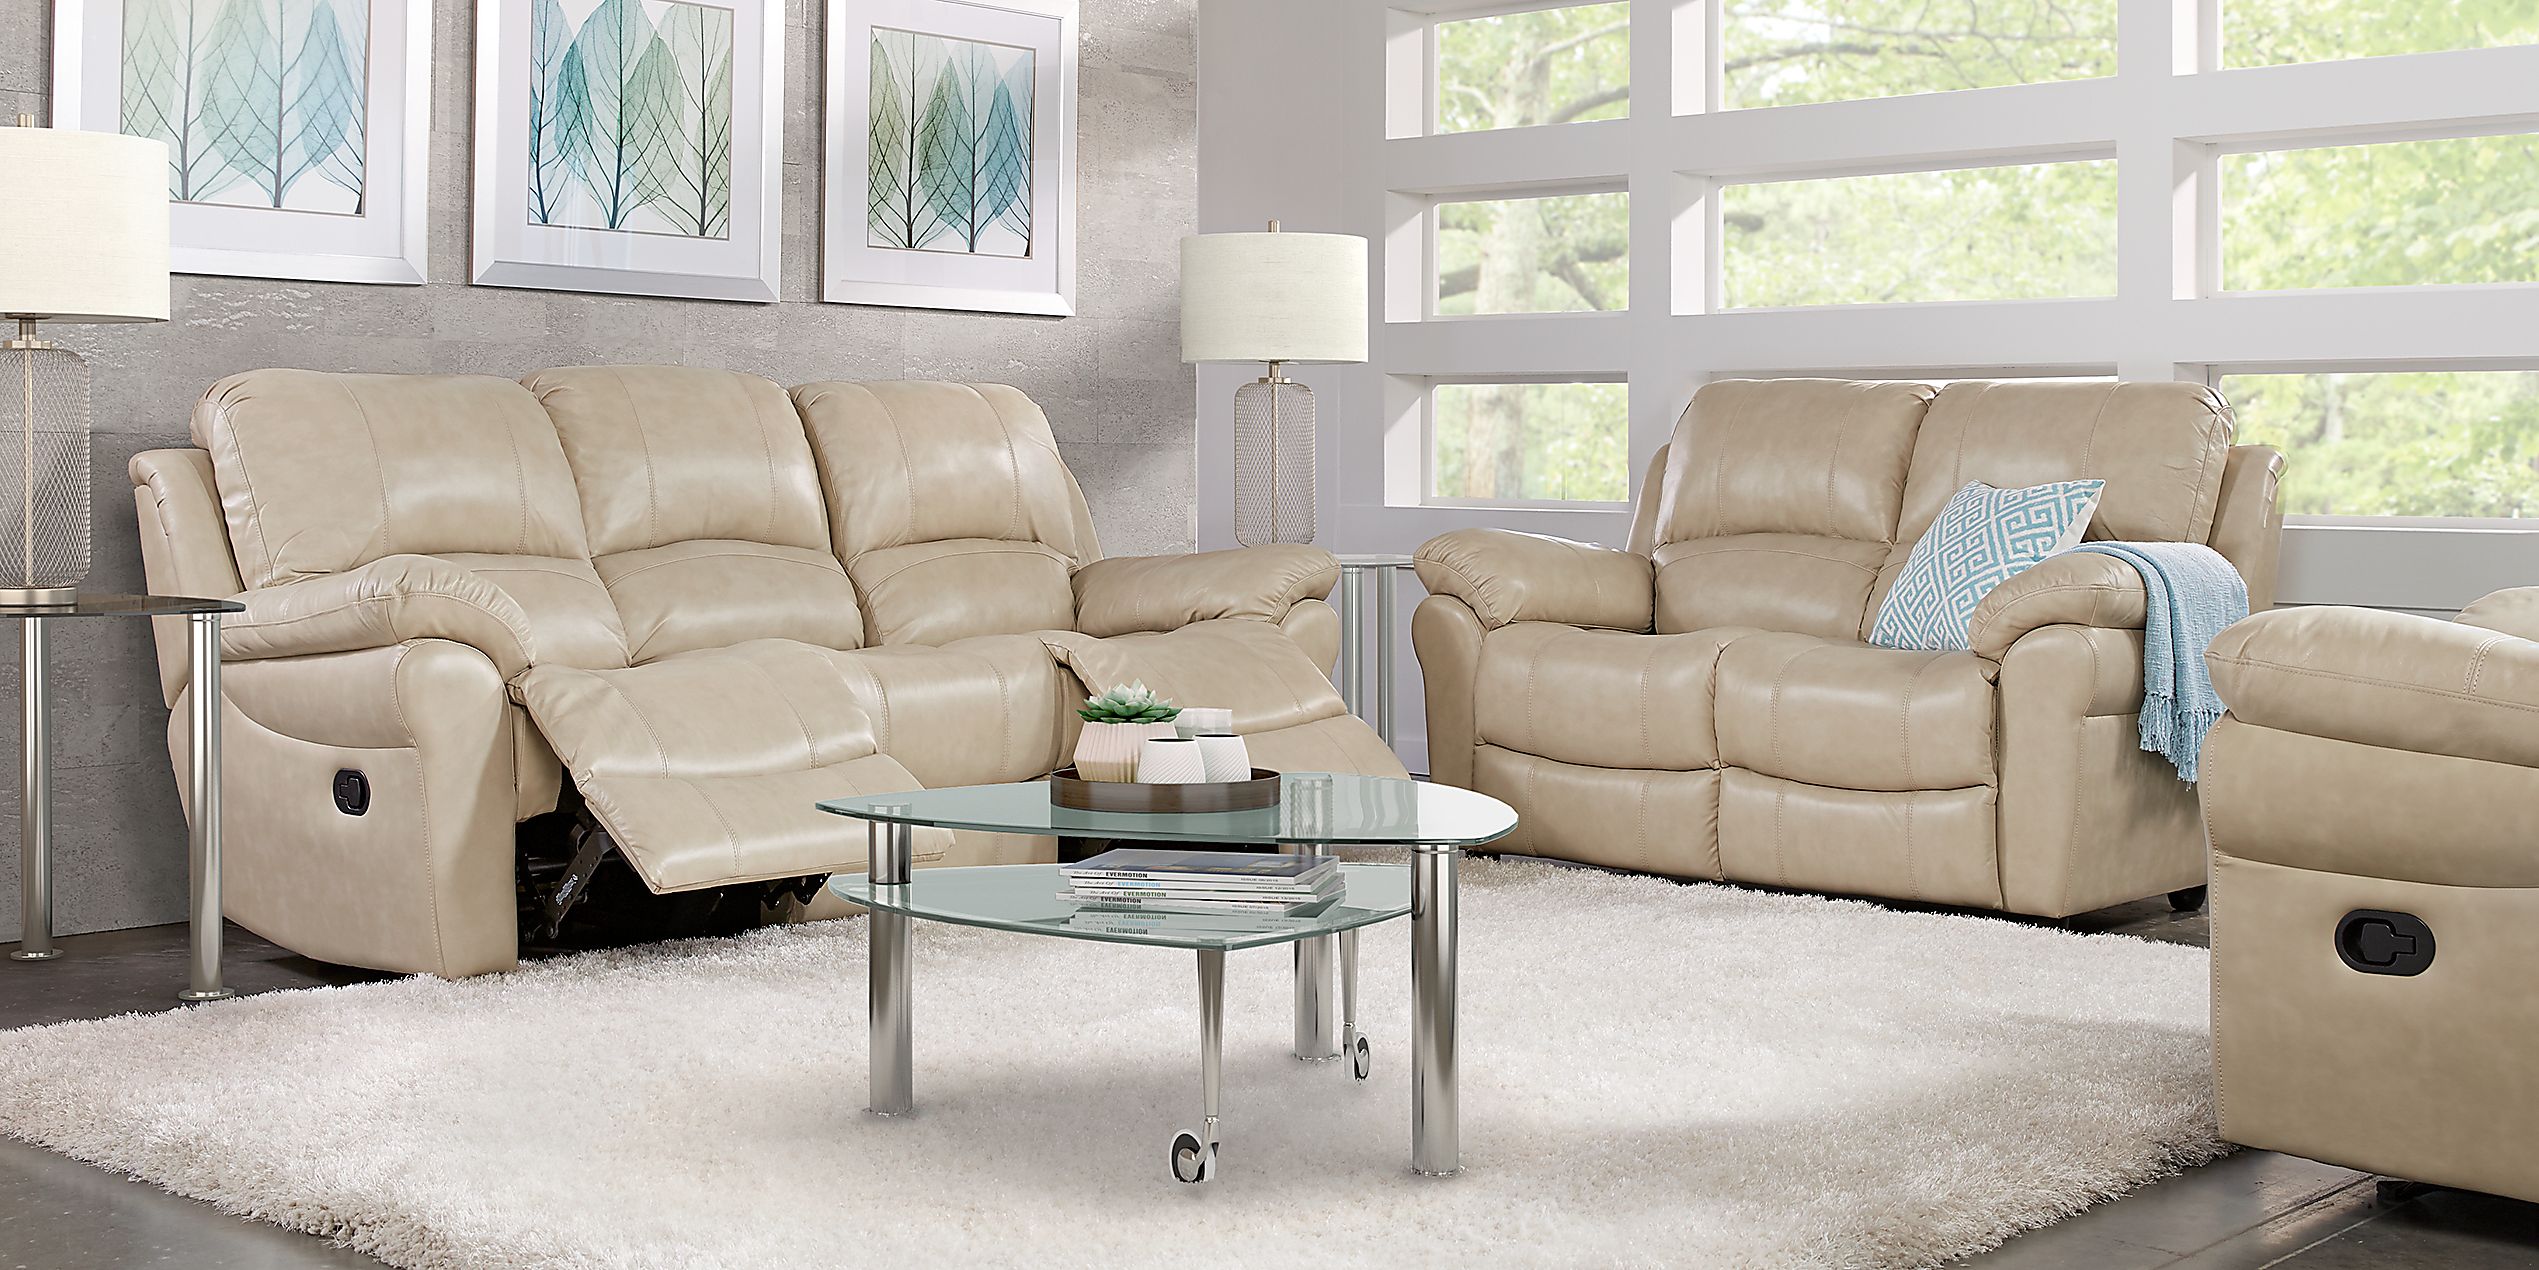 Vercelli Stone Leather 3 Pc Living Room